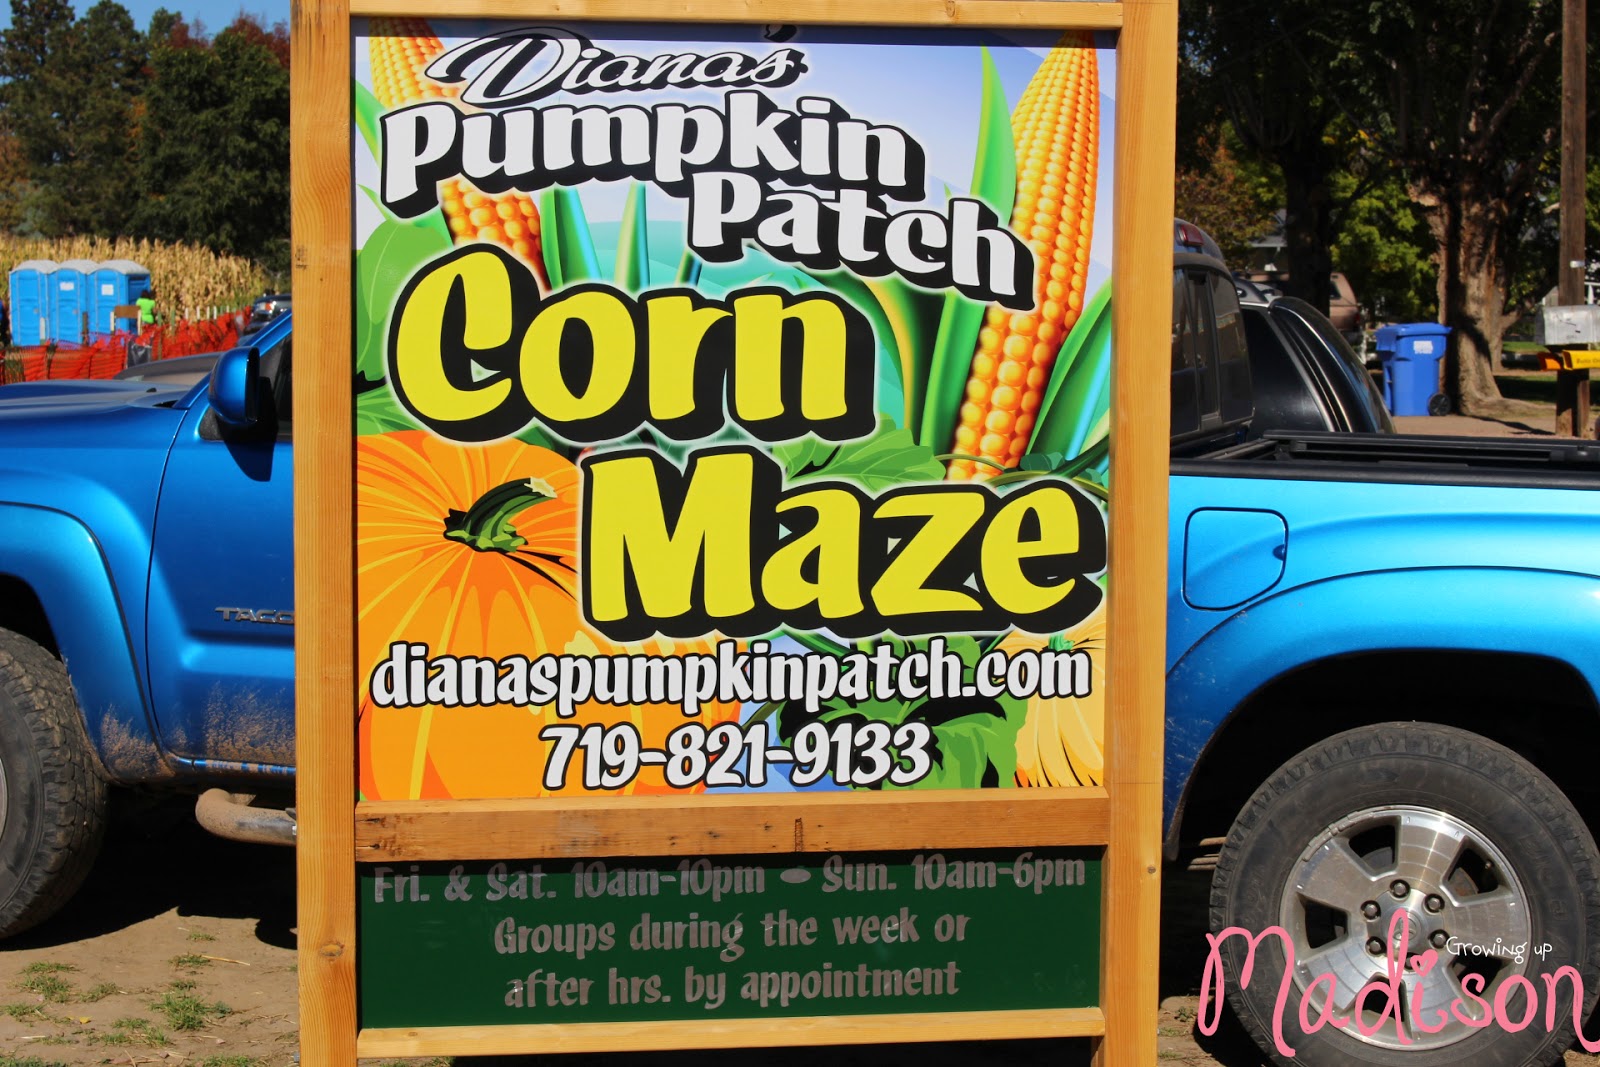 My Visit to the Pumpkin Patch and Corn Maze – Almost Wordless Wednesday